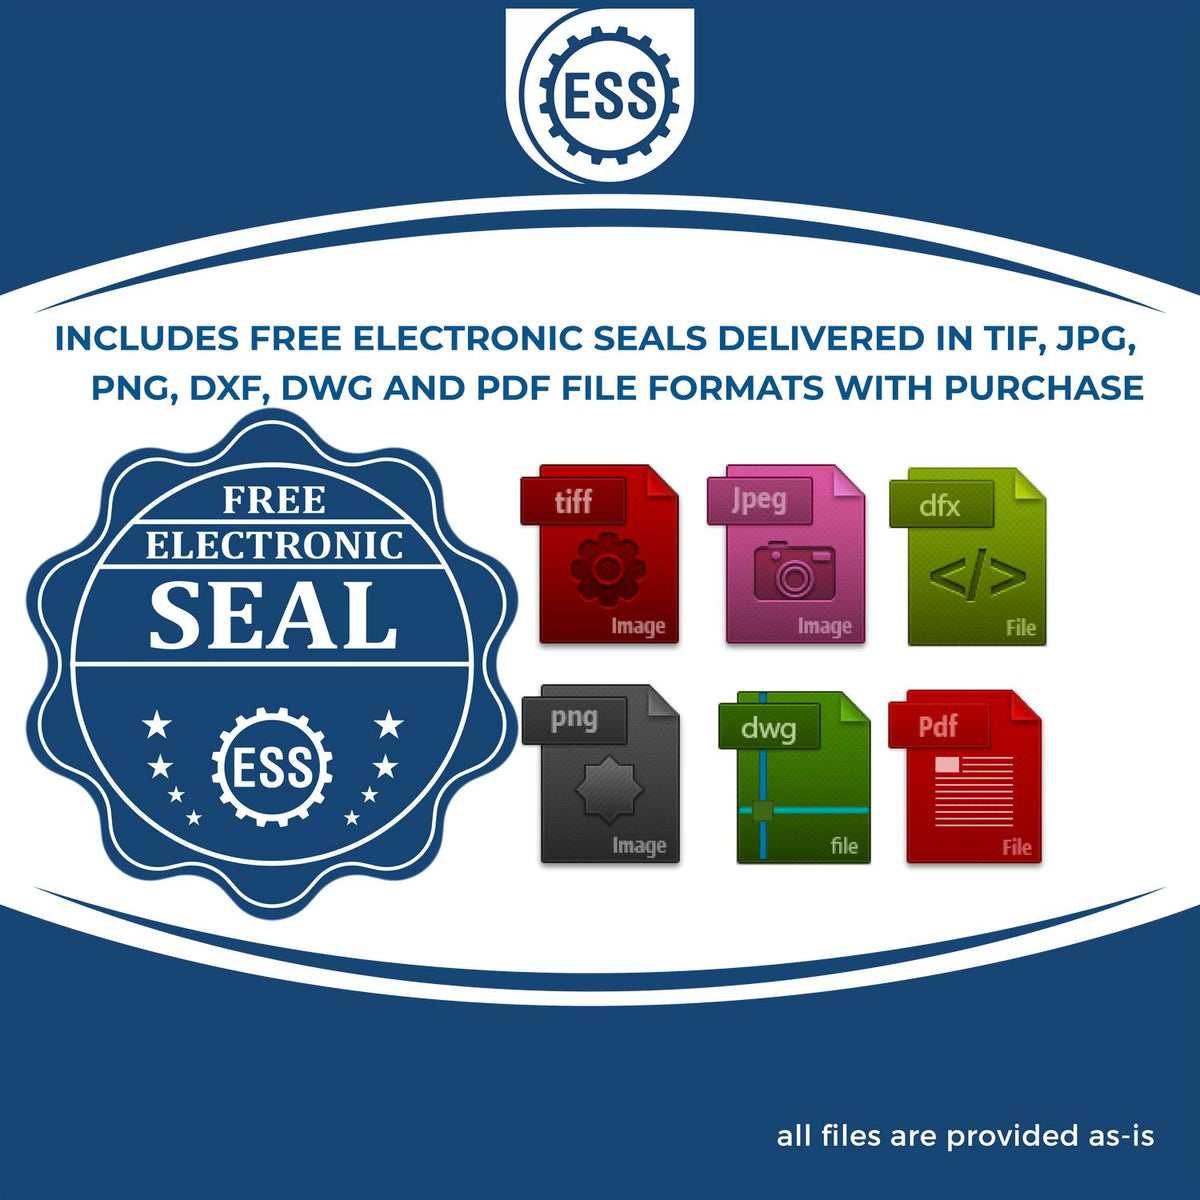 An infographic for the free electronic seal for the Slim Pre-Inked Virginia Land Surveyor Seal Stamp illustrating the different file type icons such as DXF, DWG, TIF, JPG and PNG.